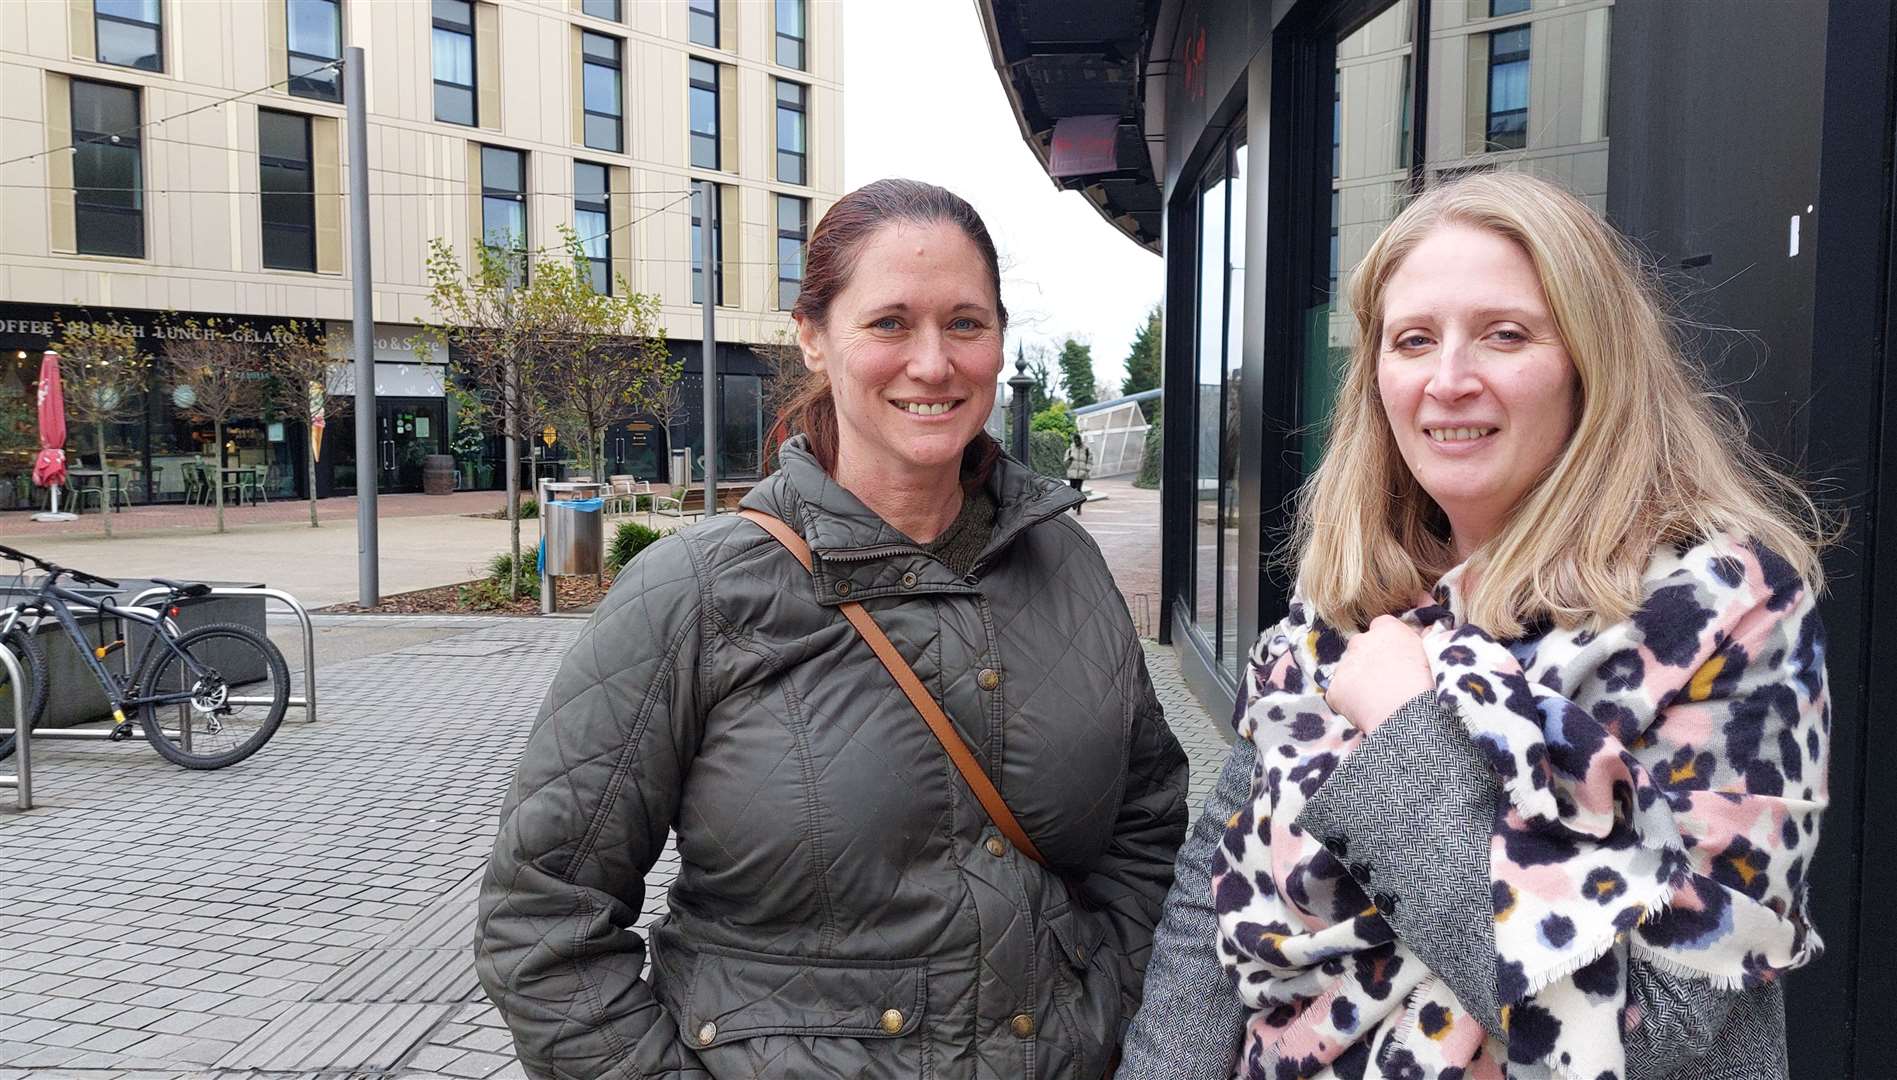 Michelle Krawczyk and Diane Turner say a new nightclub could be beneficial for Ashford